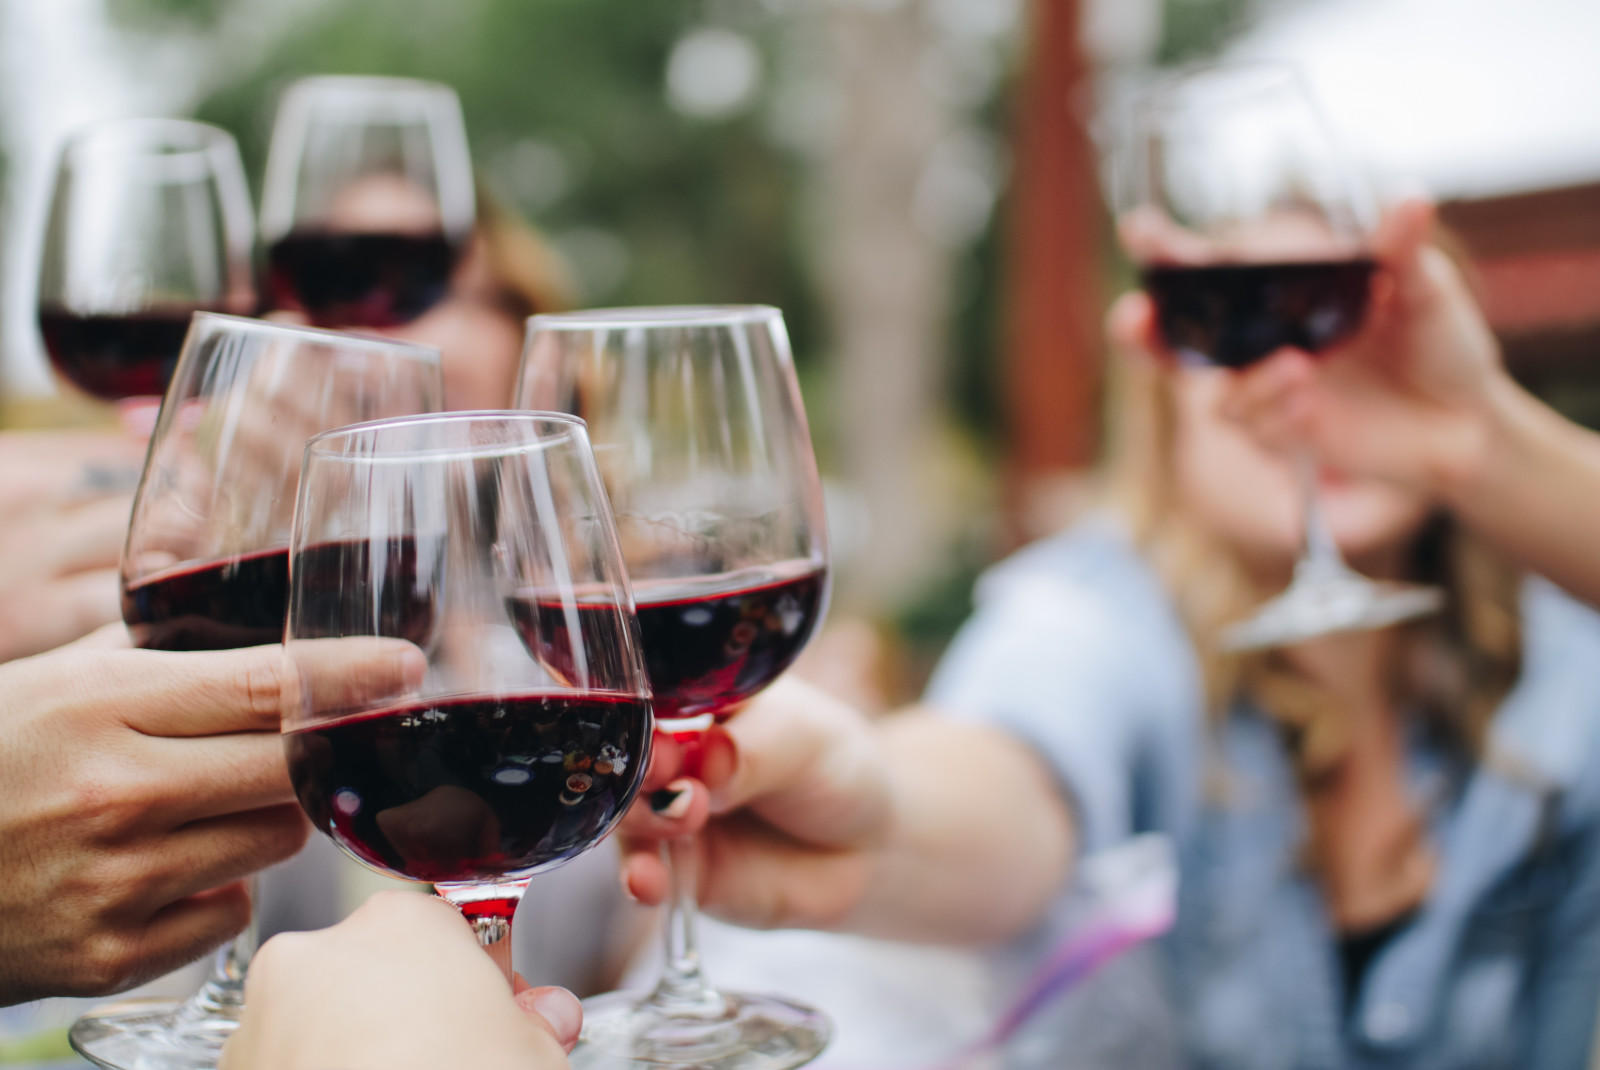 Six people cheers-ing with glasses filled with red wine